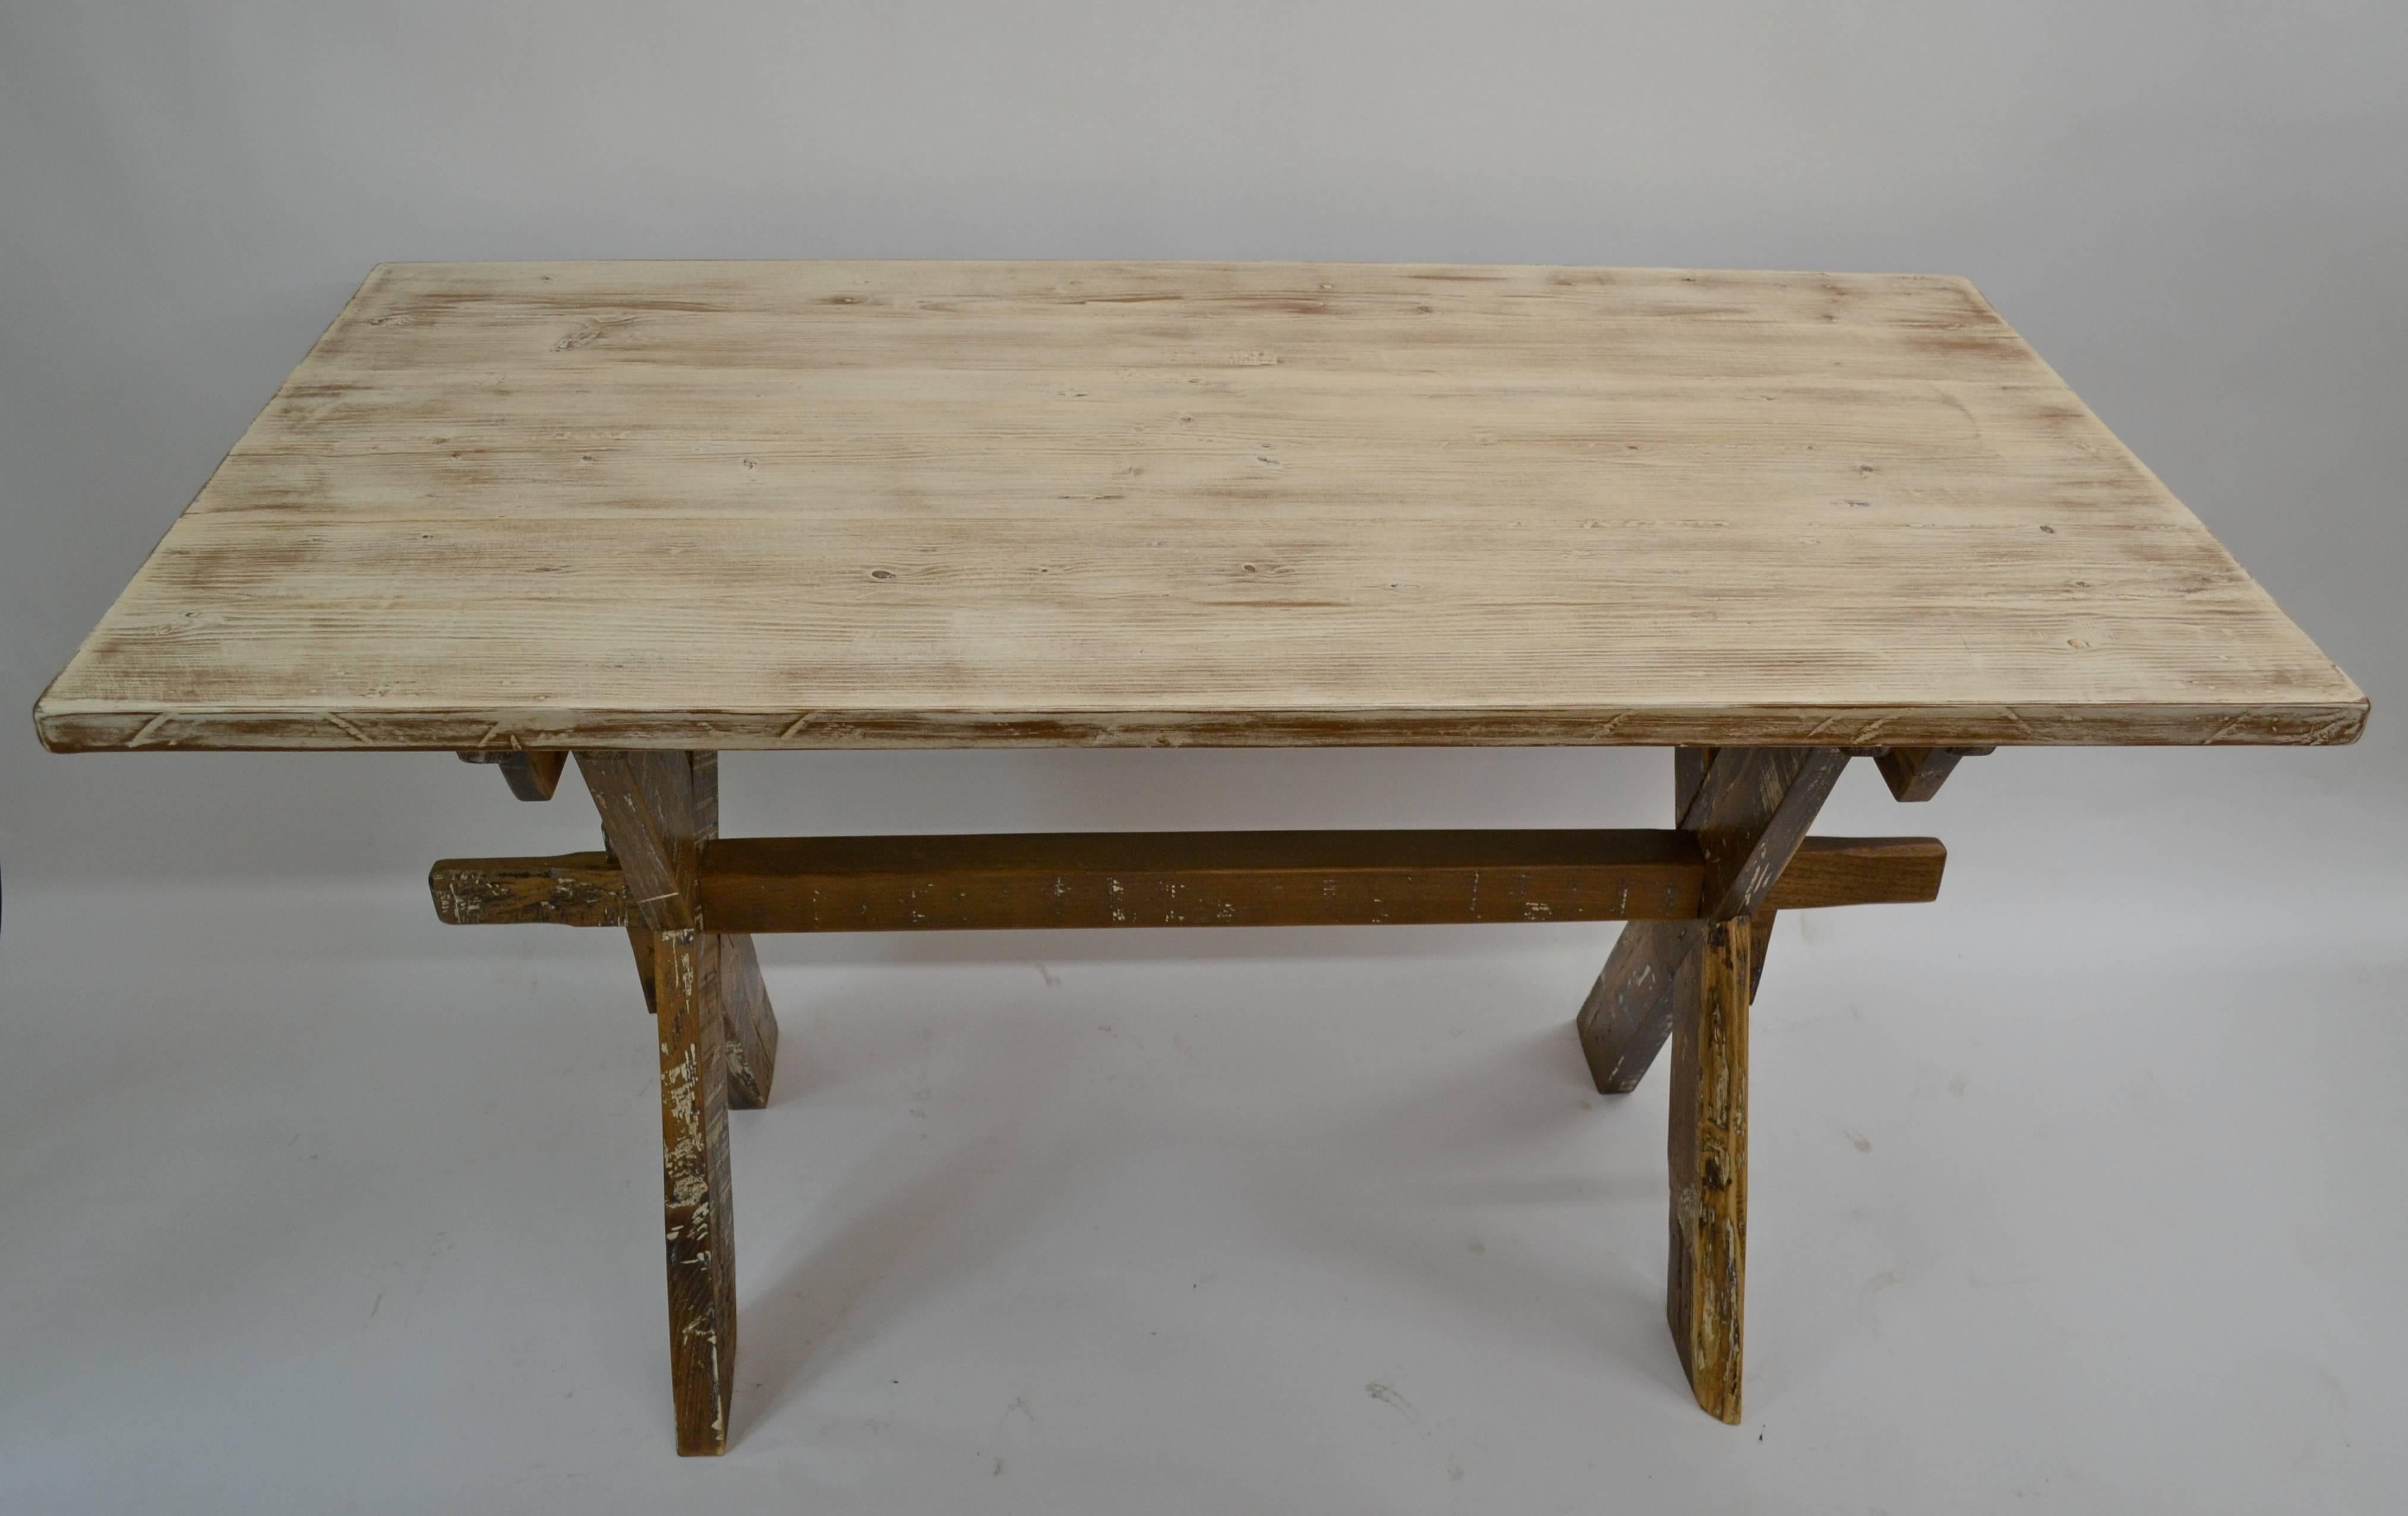 19VJL86a pine and oak trestle table, circa 1860. Measures: 56 x 29.5 x 31. $950.00.
This is an early oak “X” base trestle in very distressed old white paint, showing all the straight cut saw marks that signify manufacture by hand. A sturdy